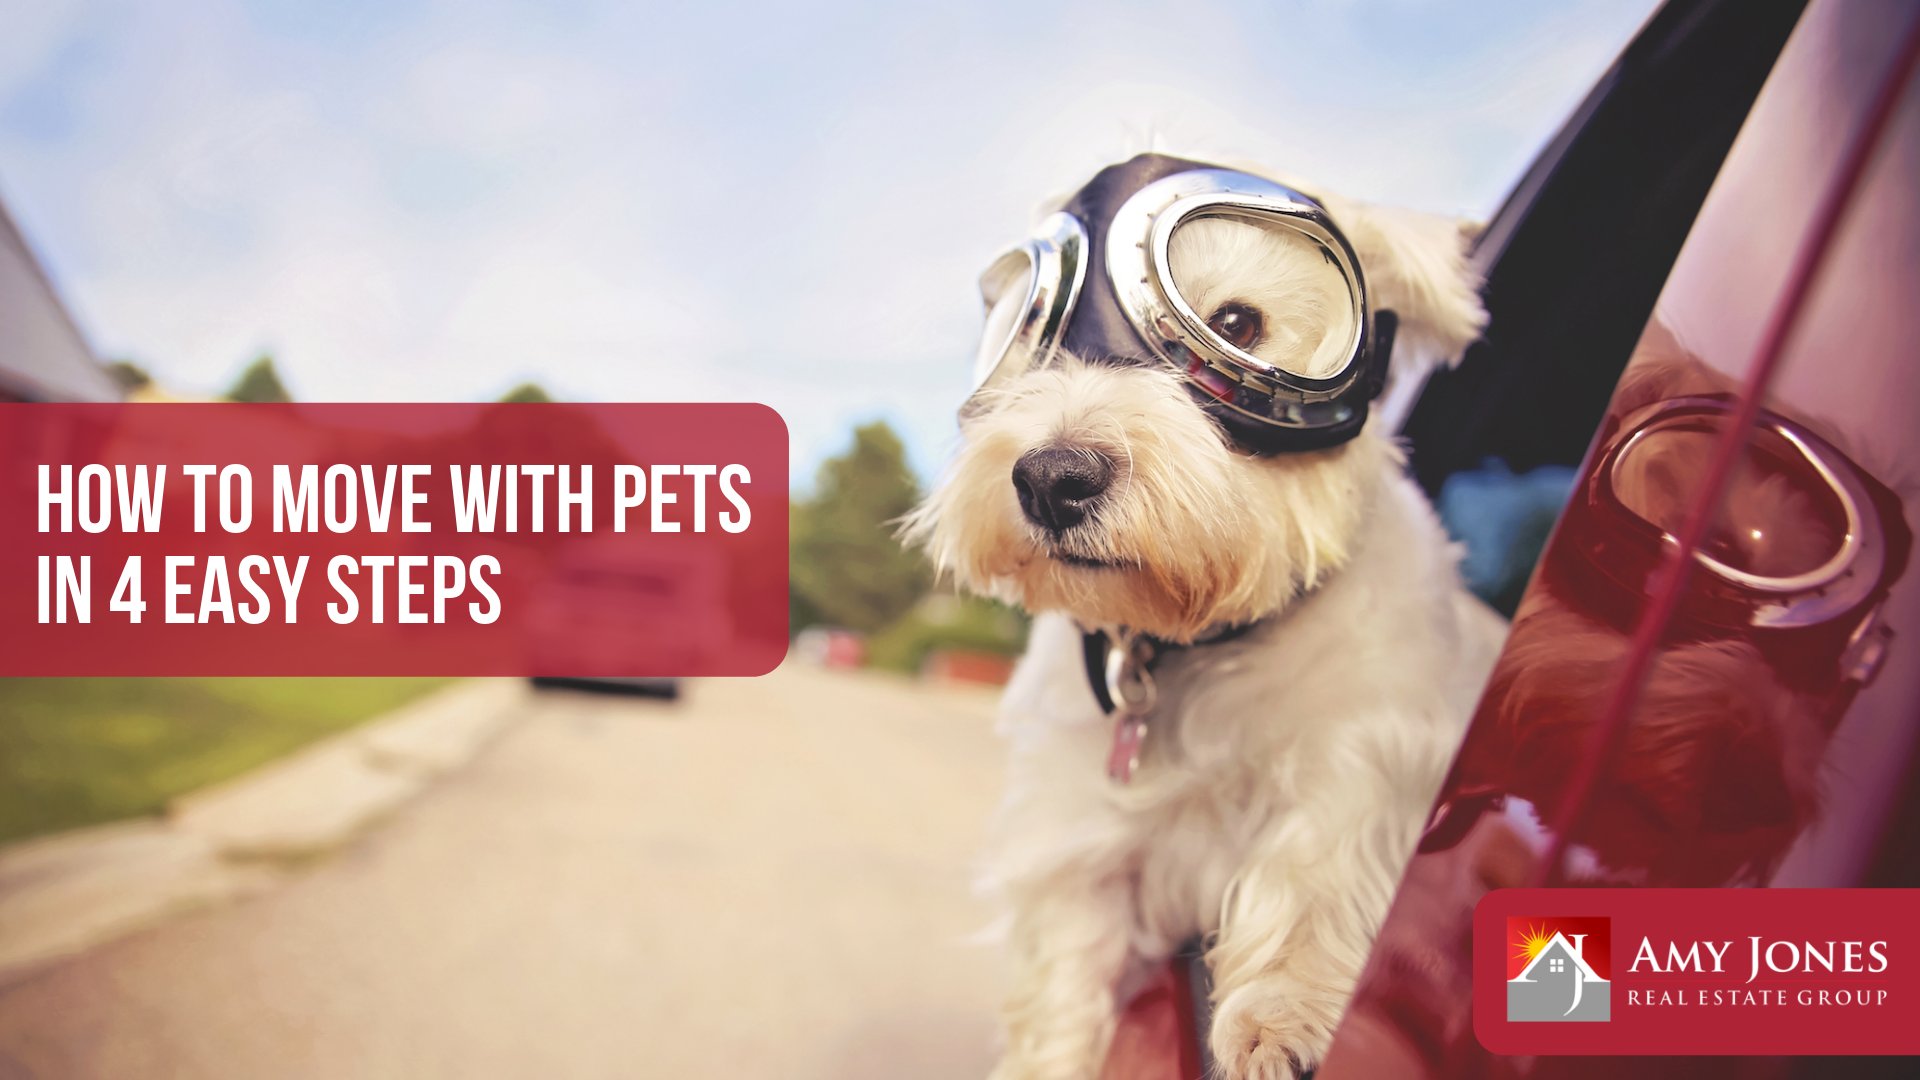 Take away the stress of moving with your pets